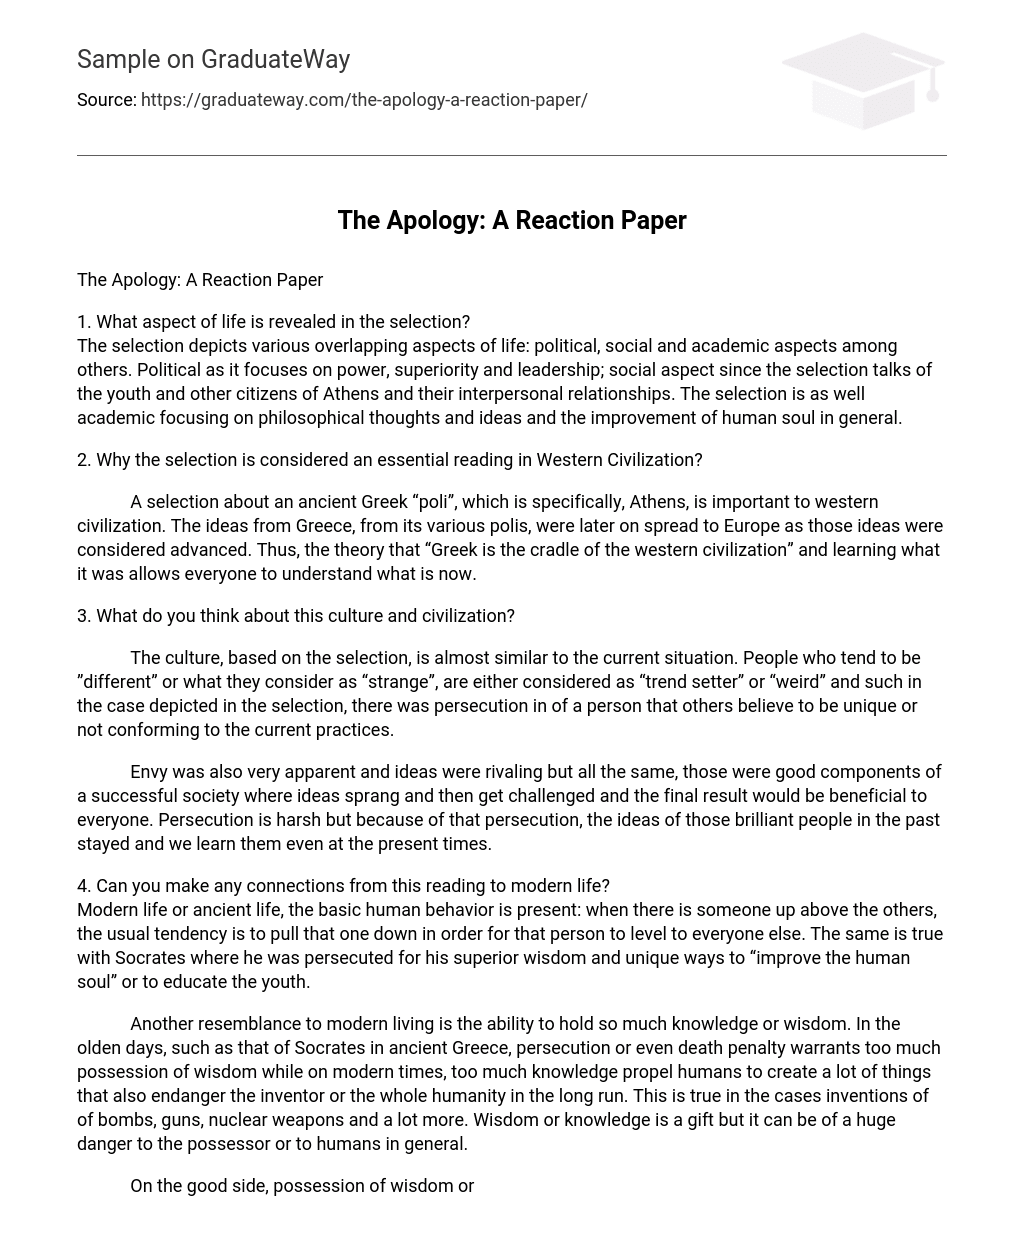 The Apology: A Reaction Paper